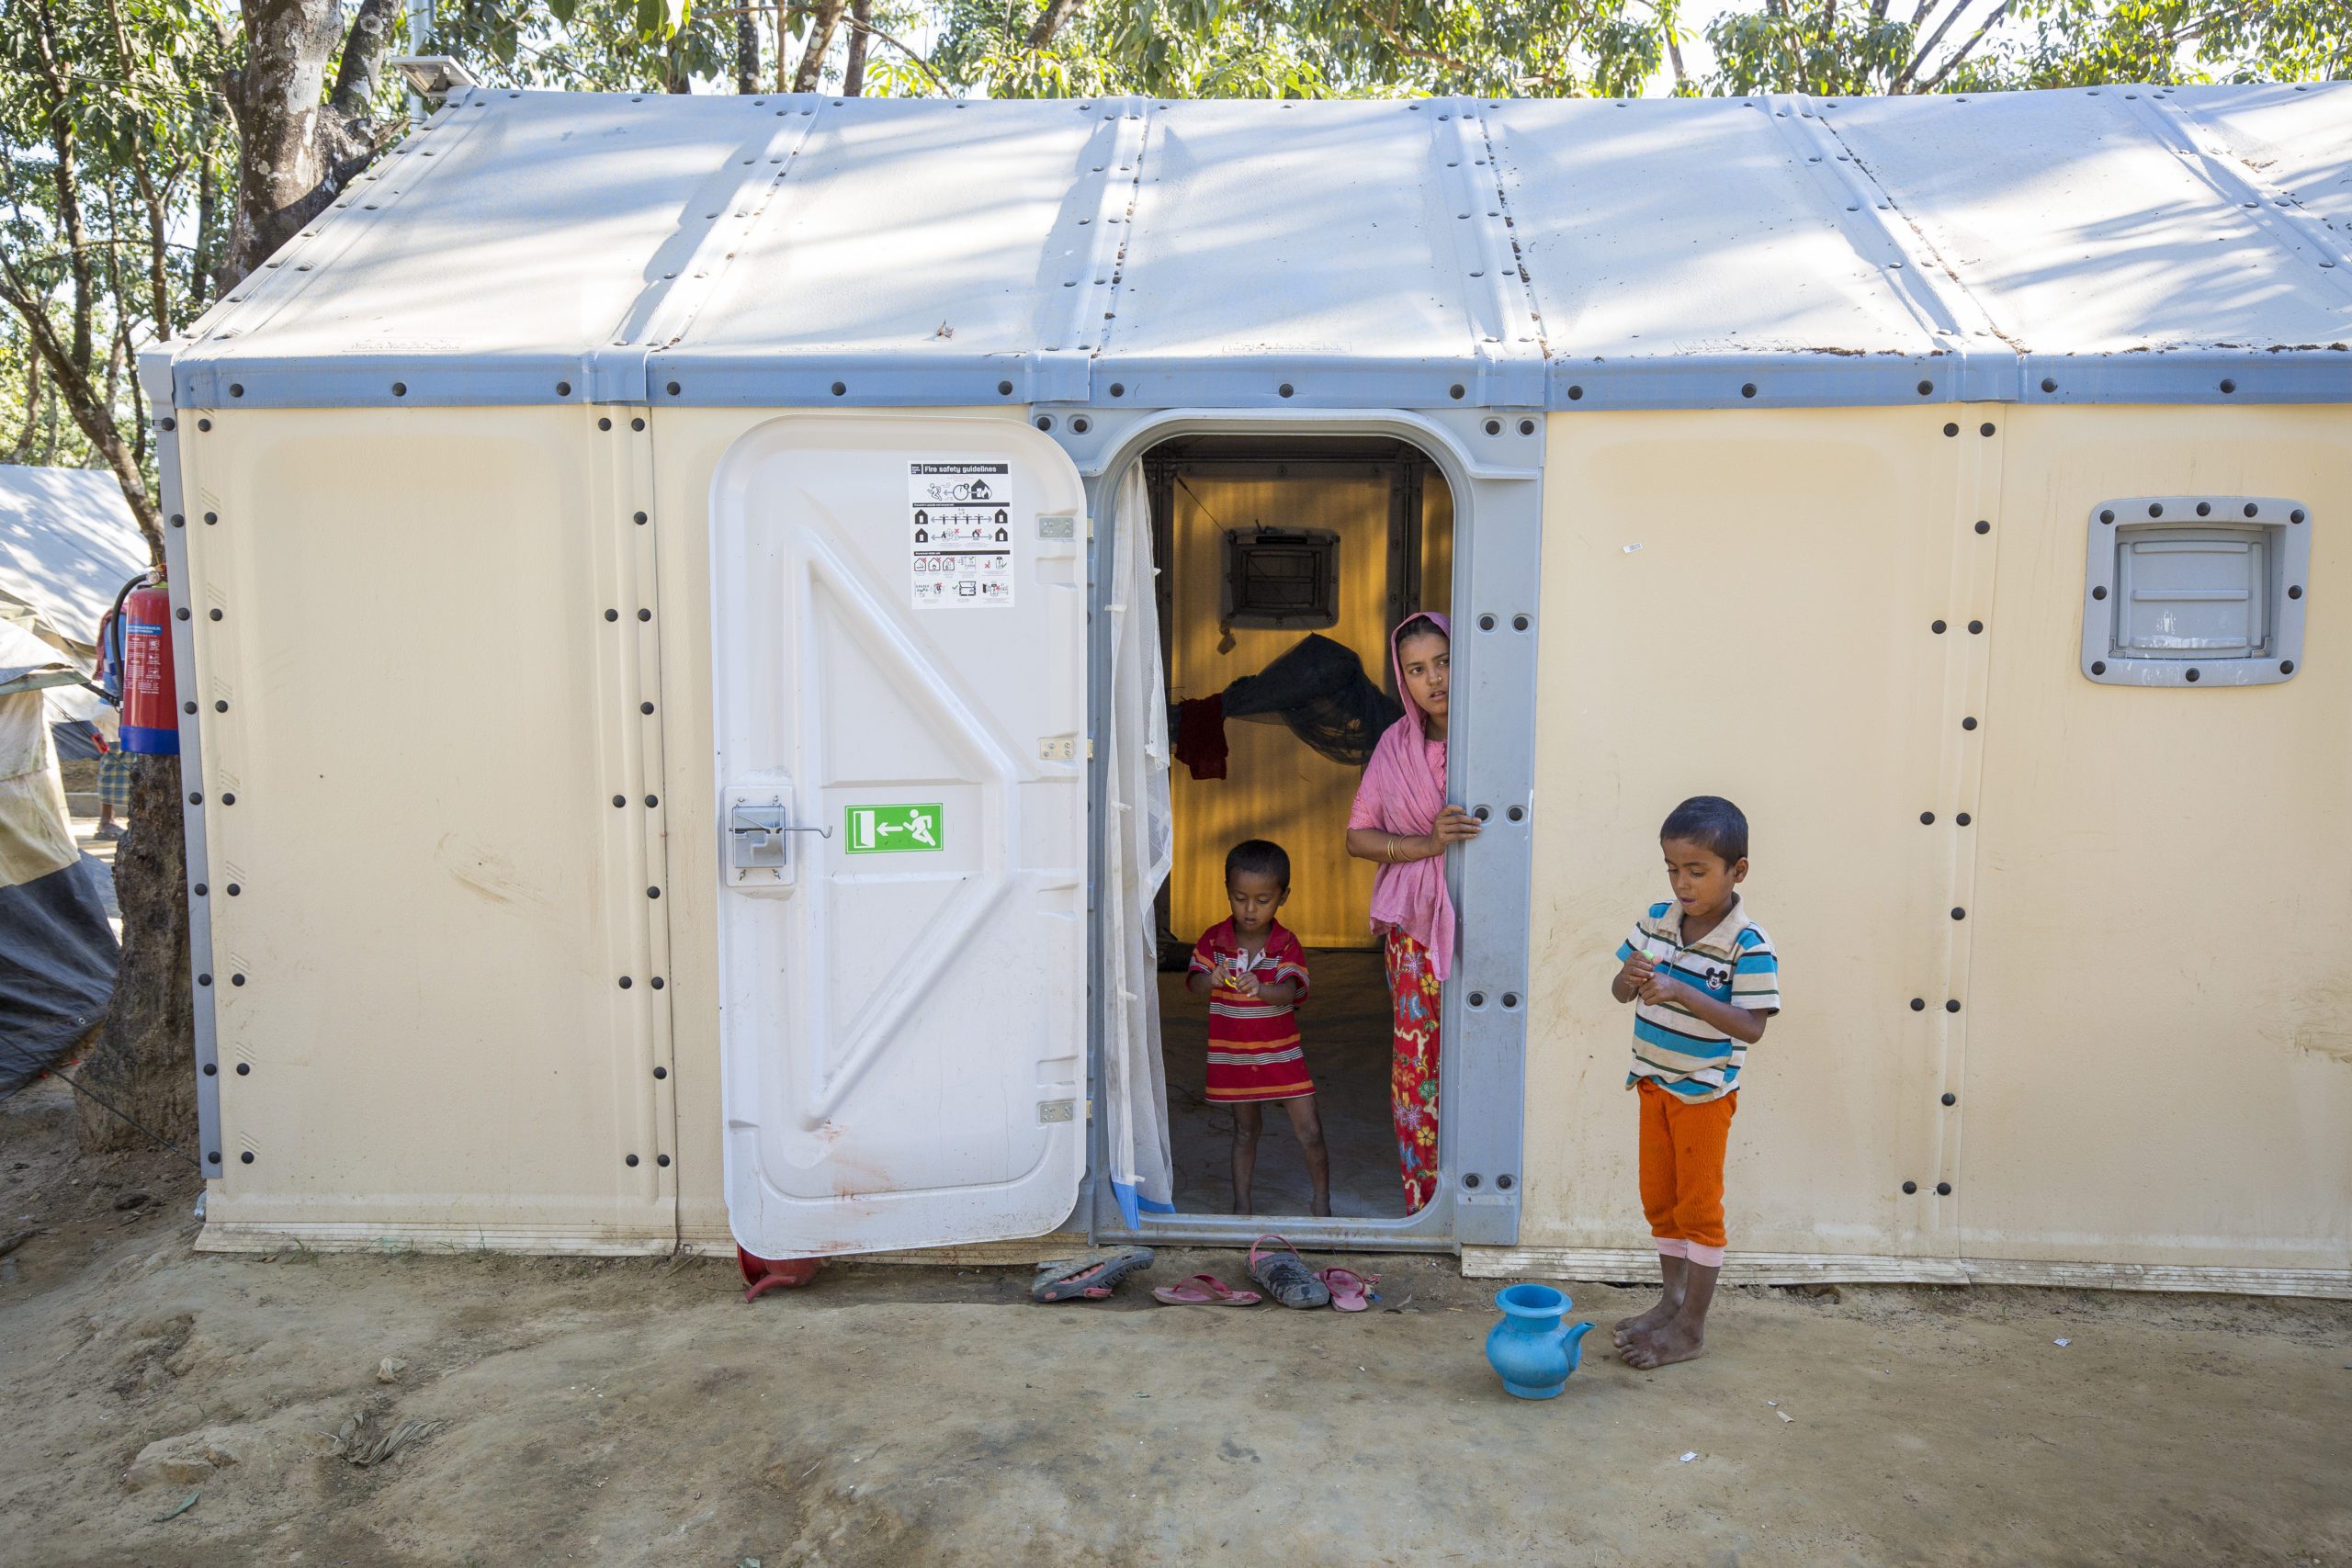 Ensuring safety and access to services for Rohingya refugees in Bangladesh